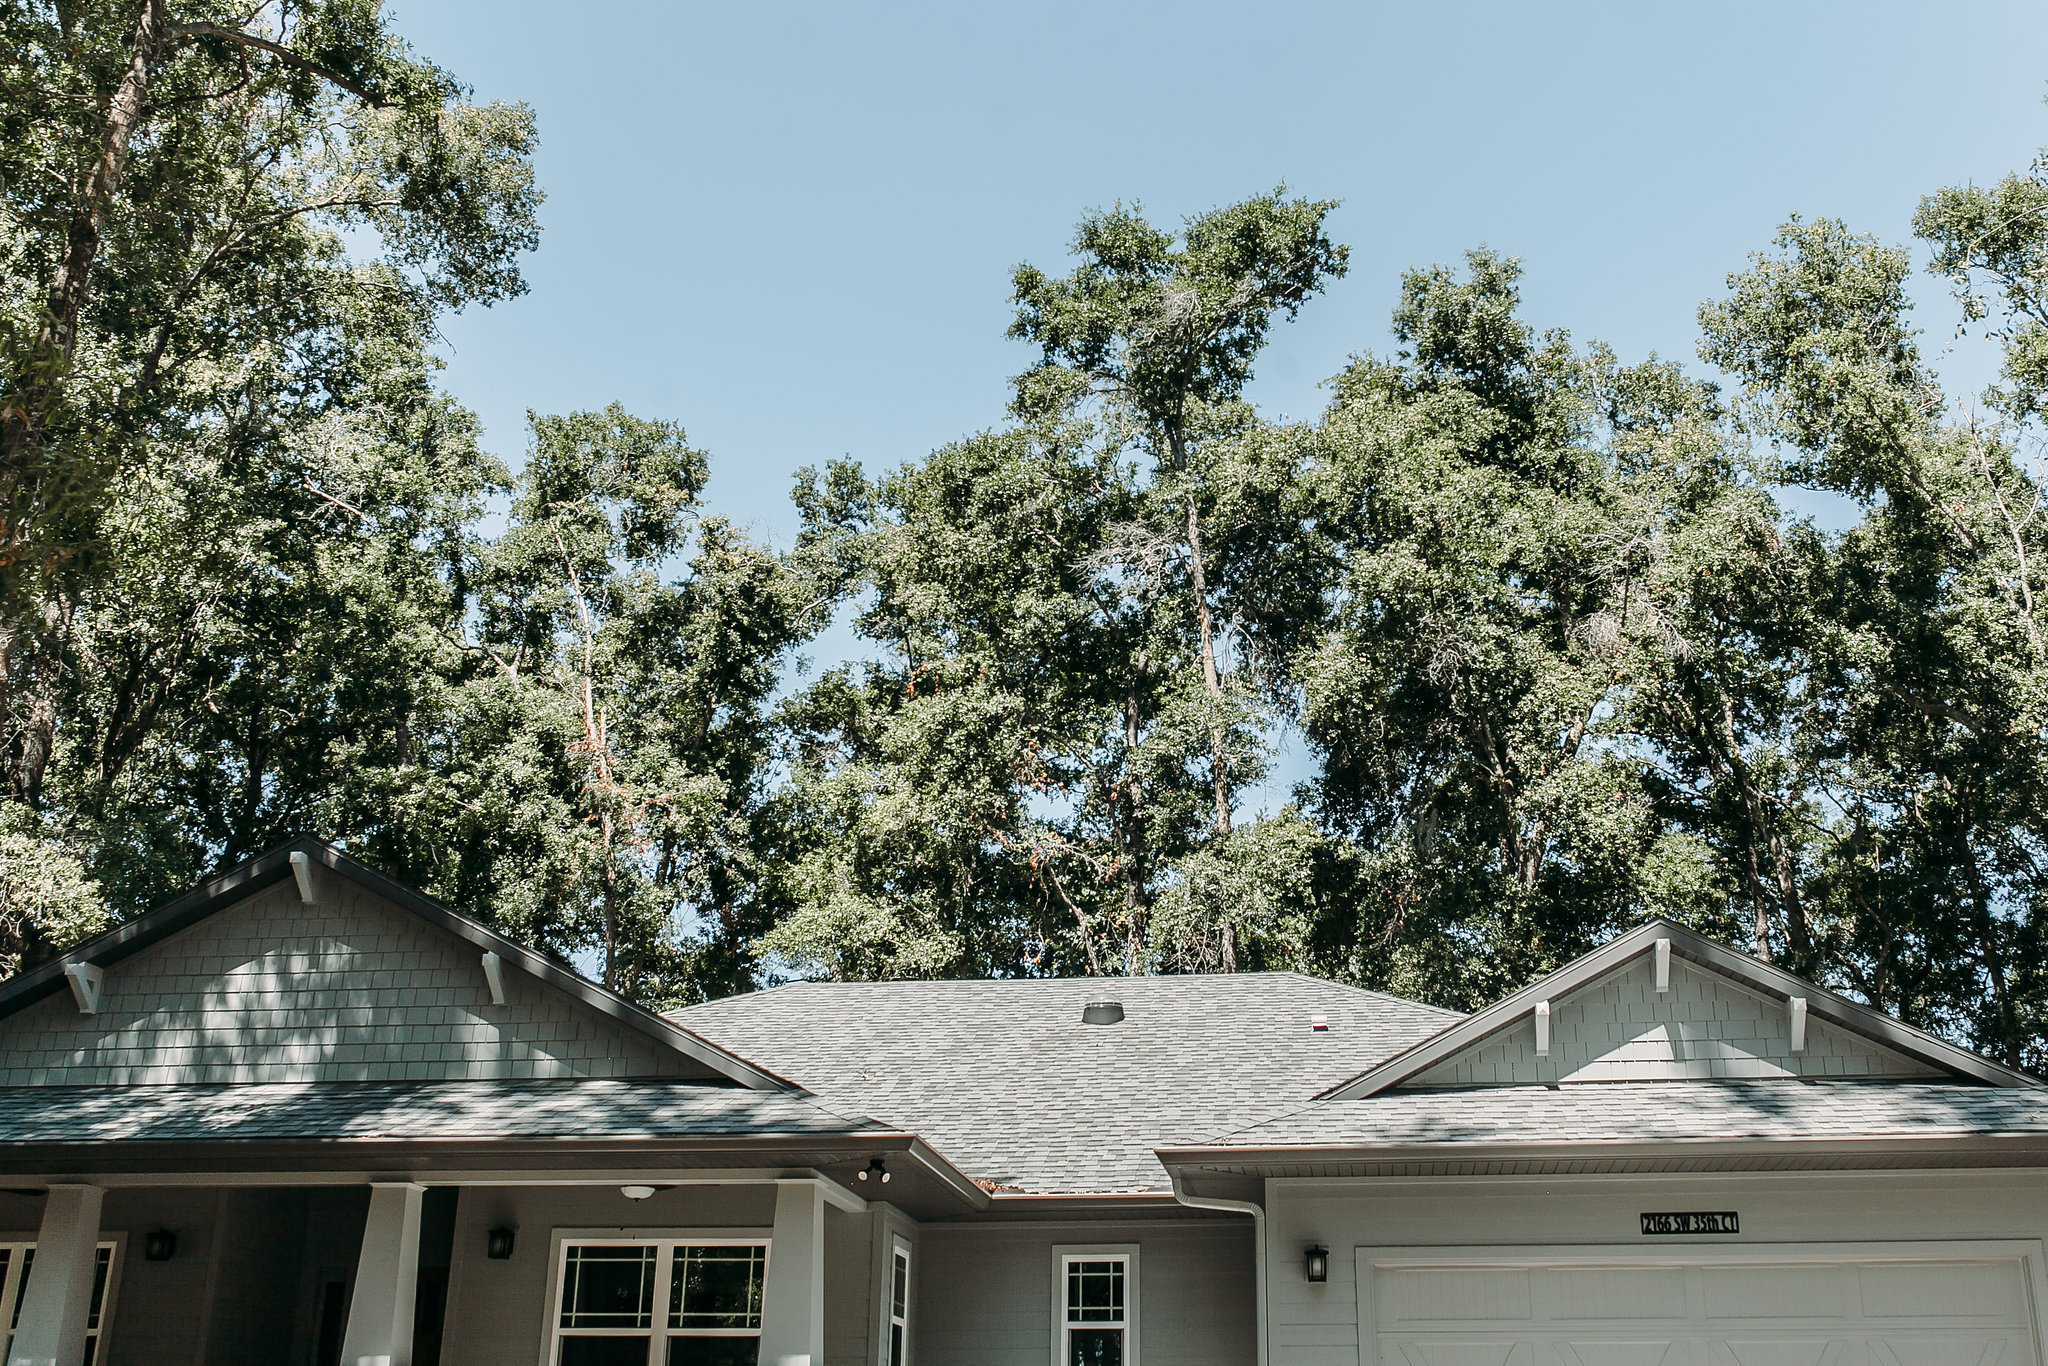 You may need to replace roof before selling your home